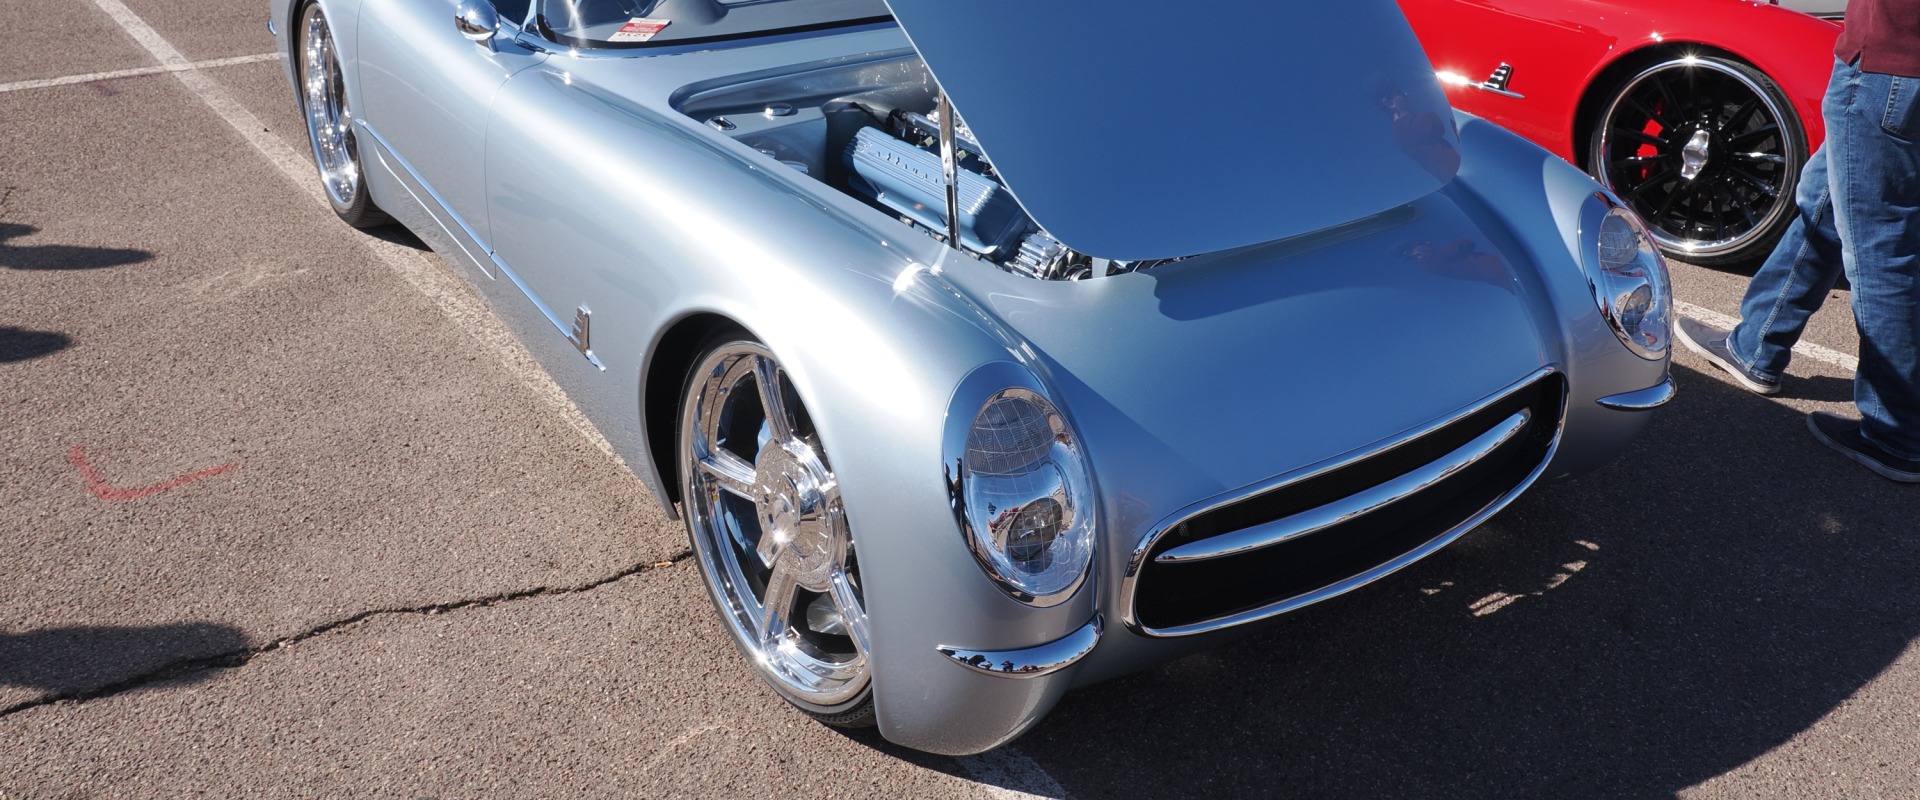 How to Make Your Custom Car Stand Out at Car Shows in Scottsdale